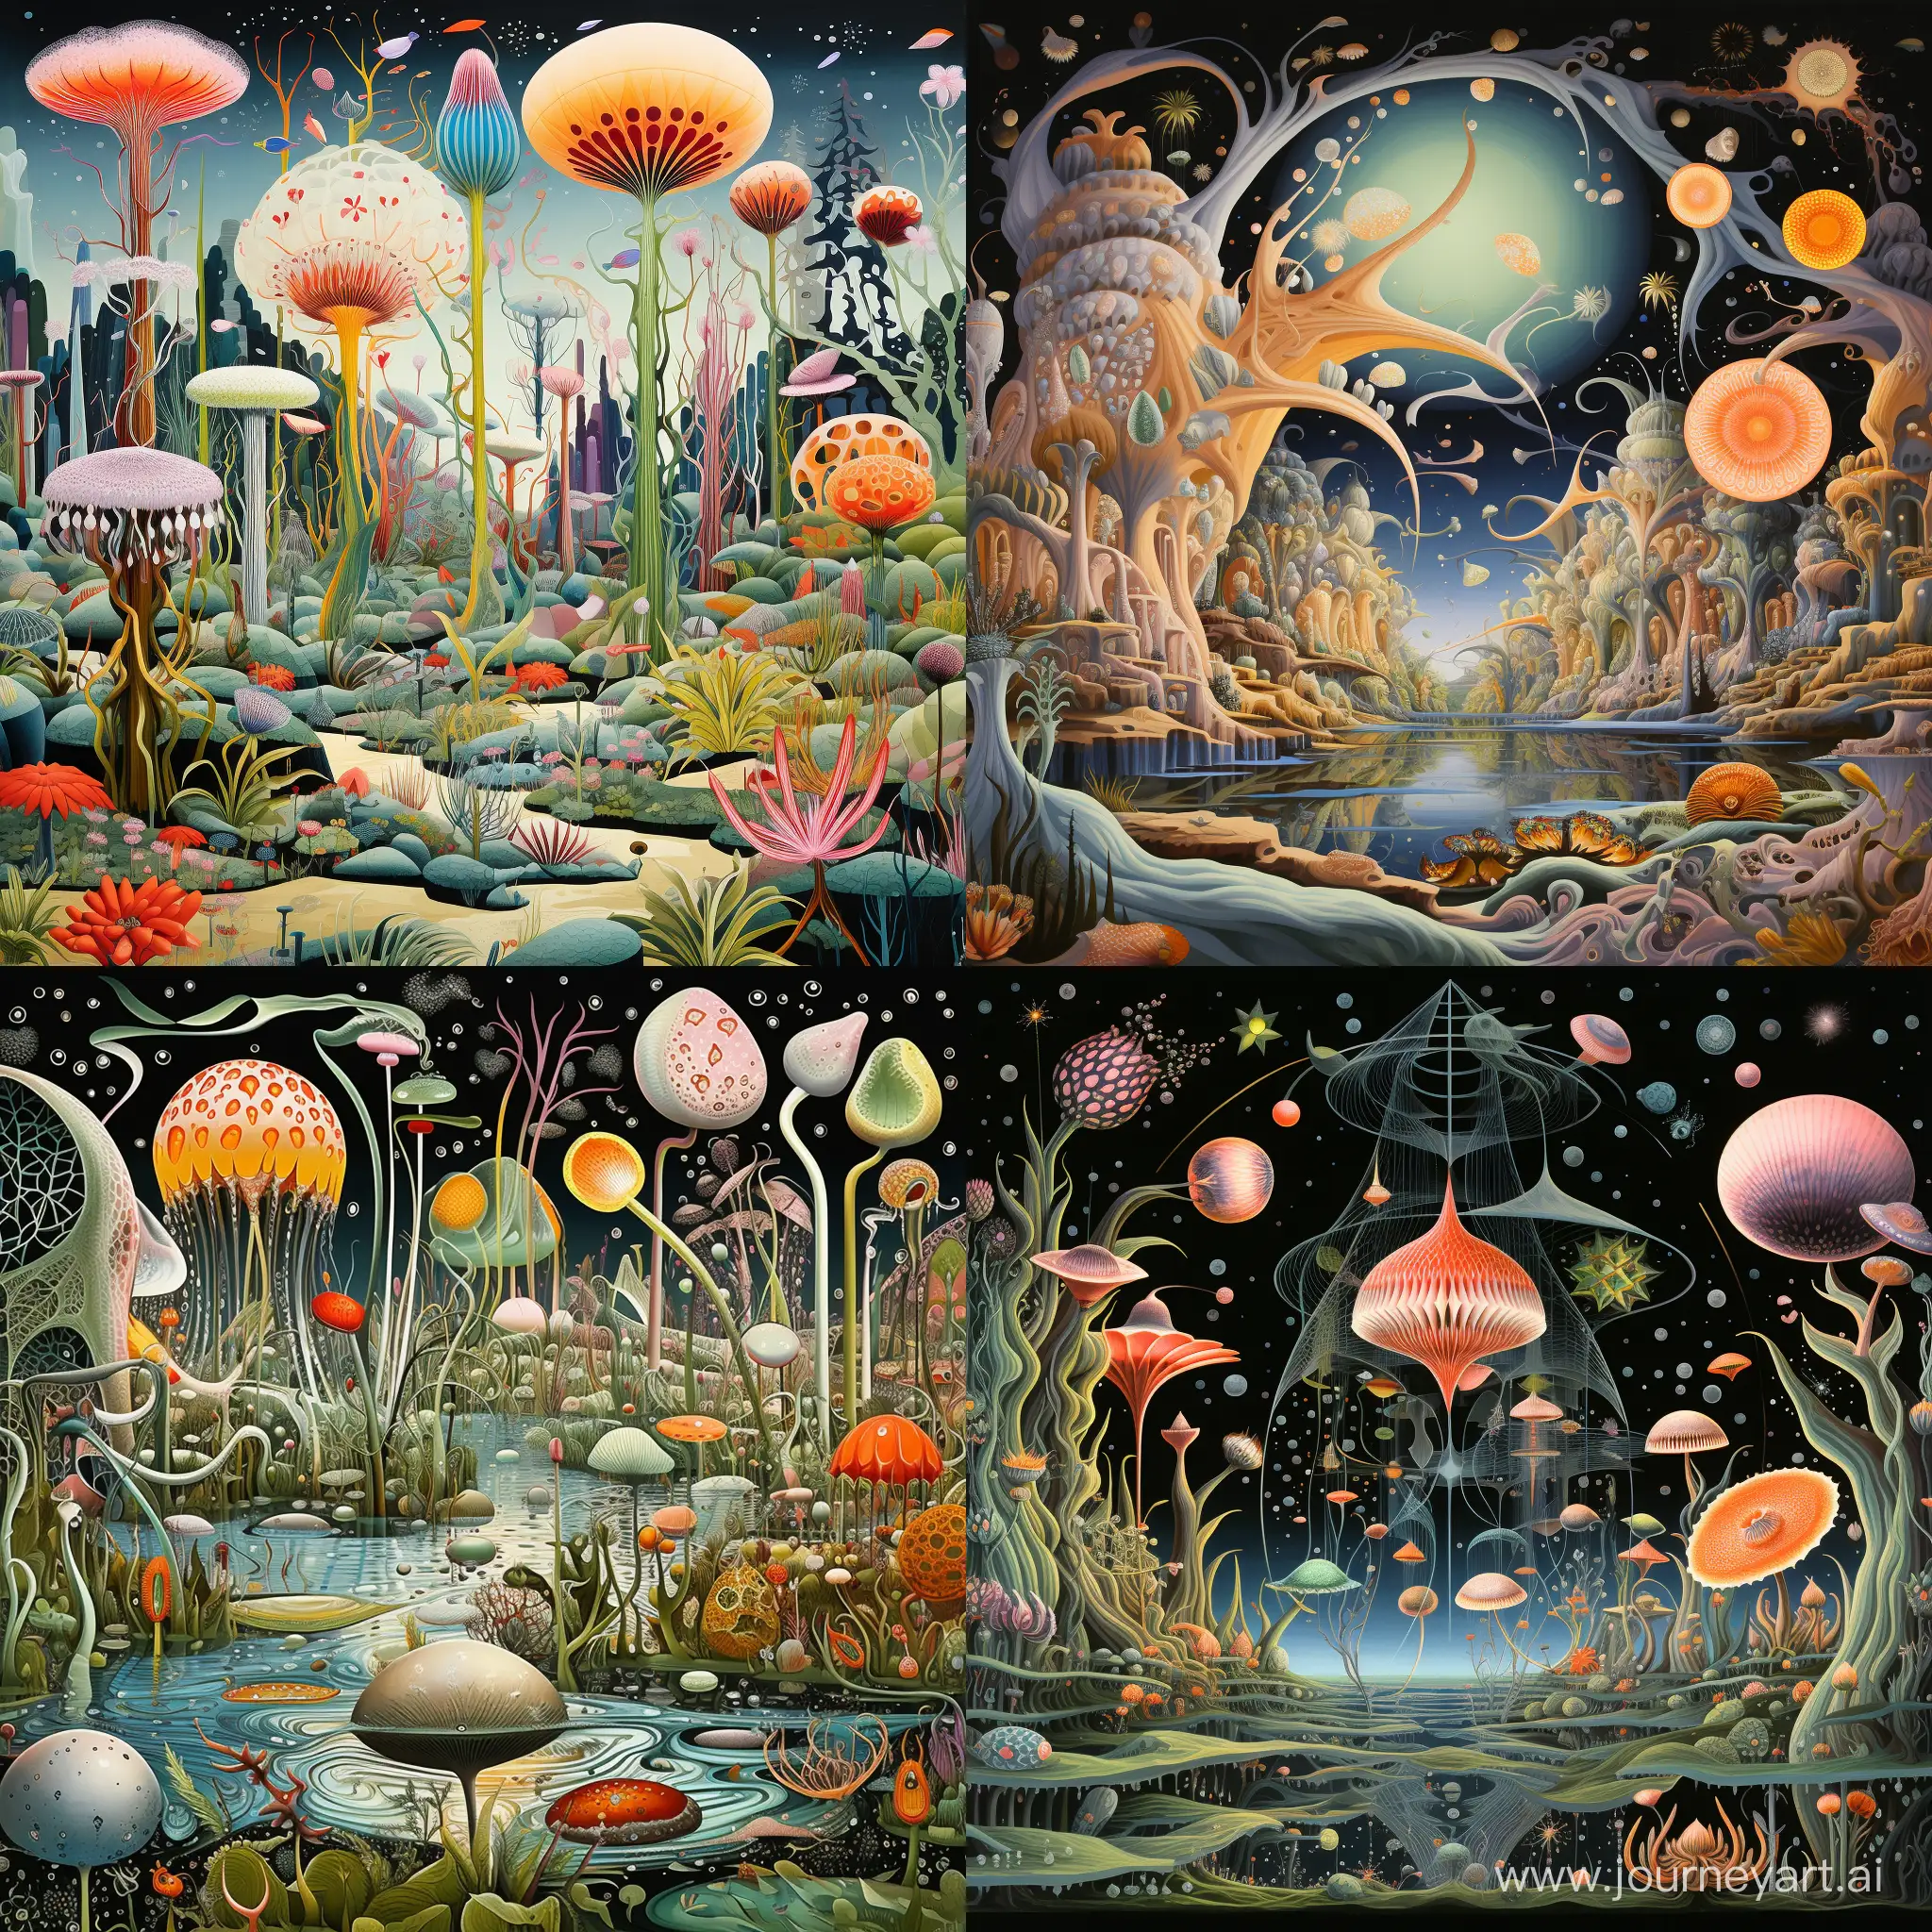 Intriguing illustrations depicting the diverse shapes and movements of amoebas in their microscopic habitat.
Vivid images of amoebas engaged in various activities such as feeding, reproduction, or moving through their habitat.
Detailed artwork showing the complex structures and biological features unique to amoebas.Jesus in the Garden of Eden